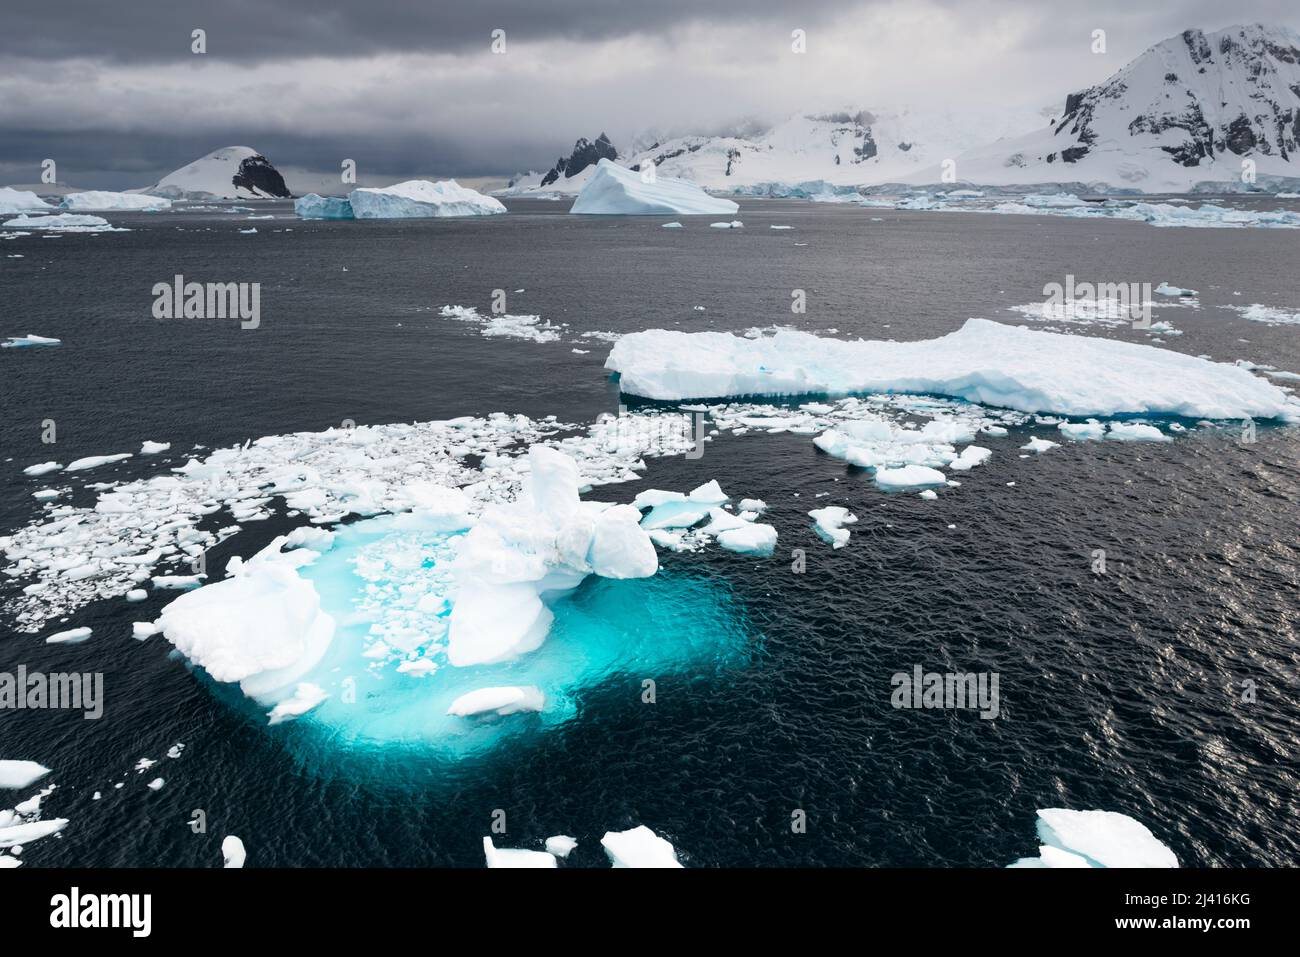 Looking west from Danco Island, Errera Channel,  towards the islands bounding the Gerlache Strait, with icebergs, islands and drift ice.  Antarctica Stock Photo